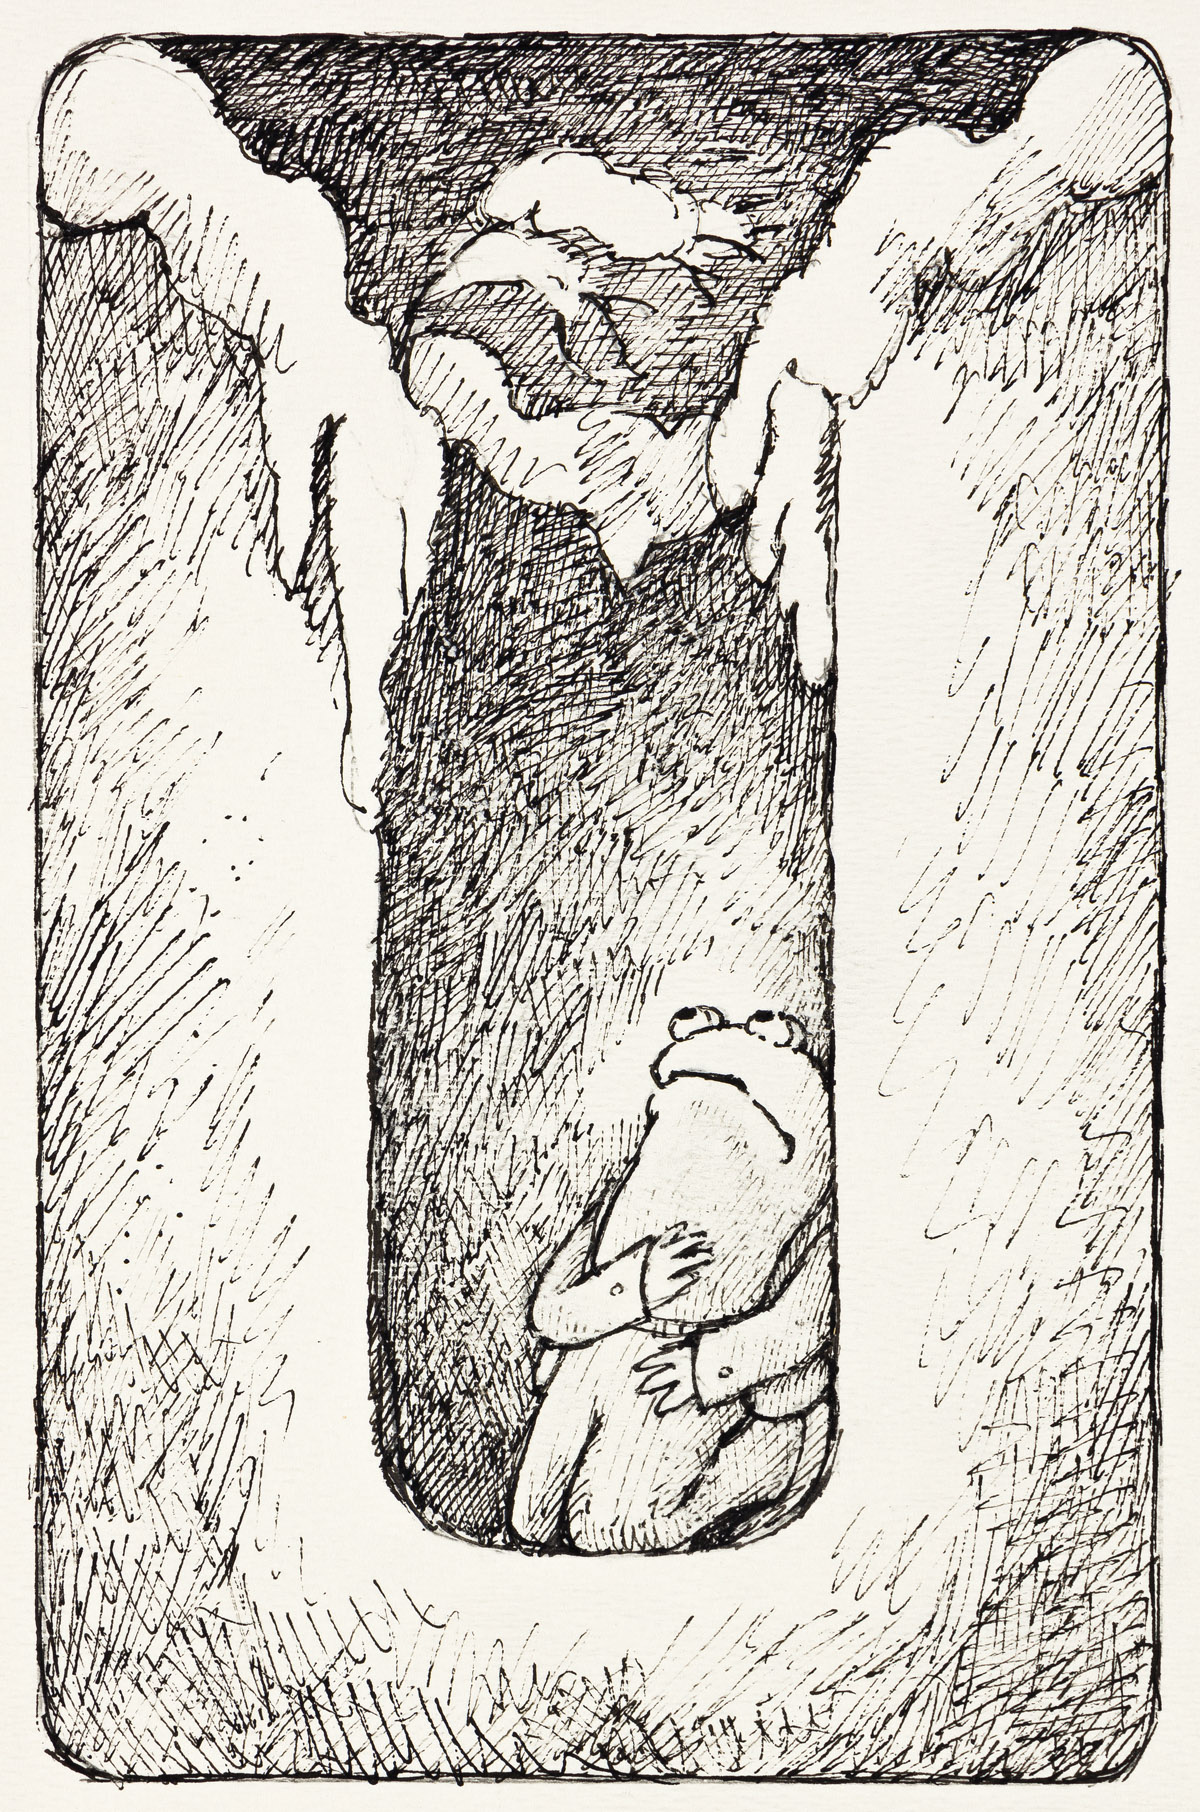 ARNOLD LOBEL (1933-1987) What if Frog has fallen into a deep hole and cannot get out? * Toad opened the door once more but Frog was